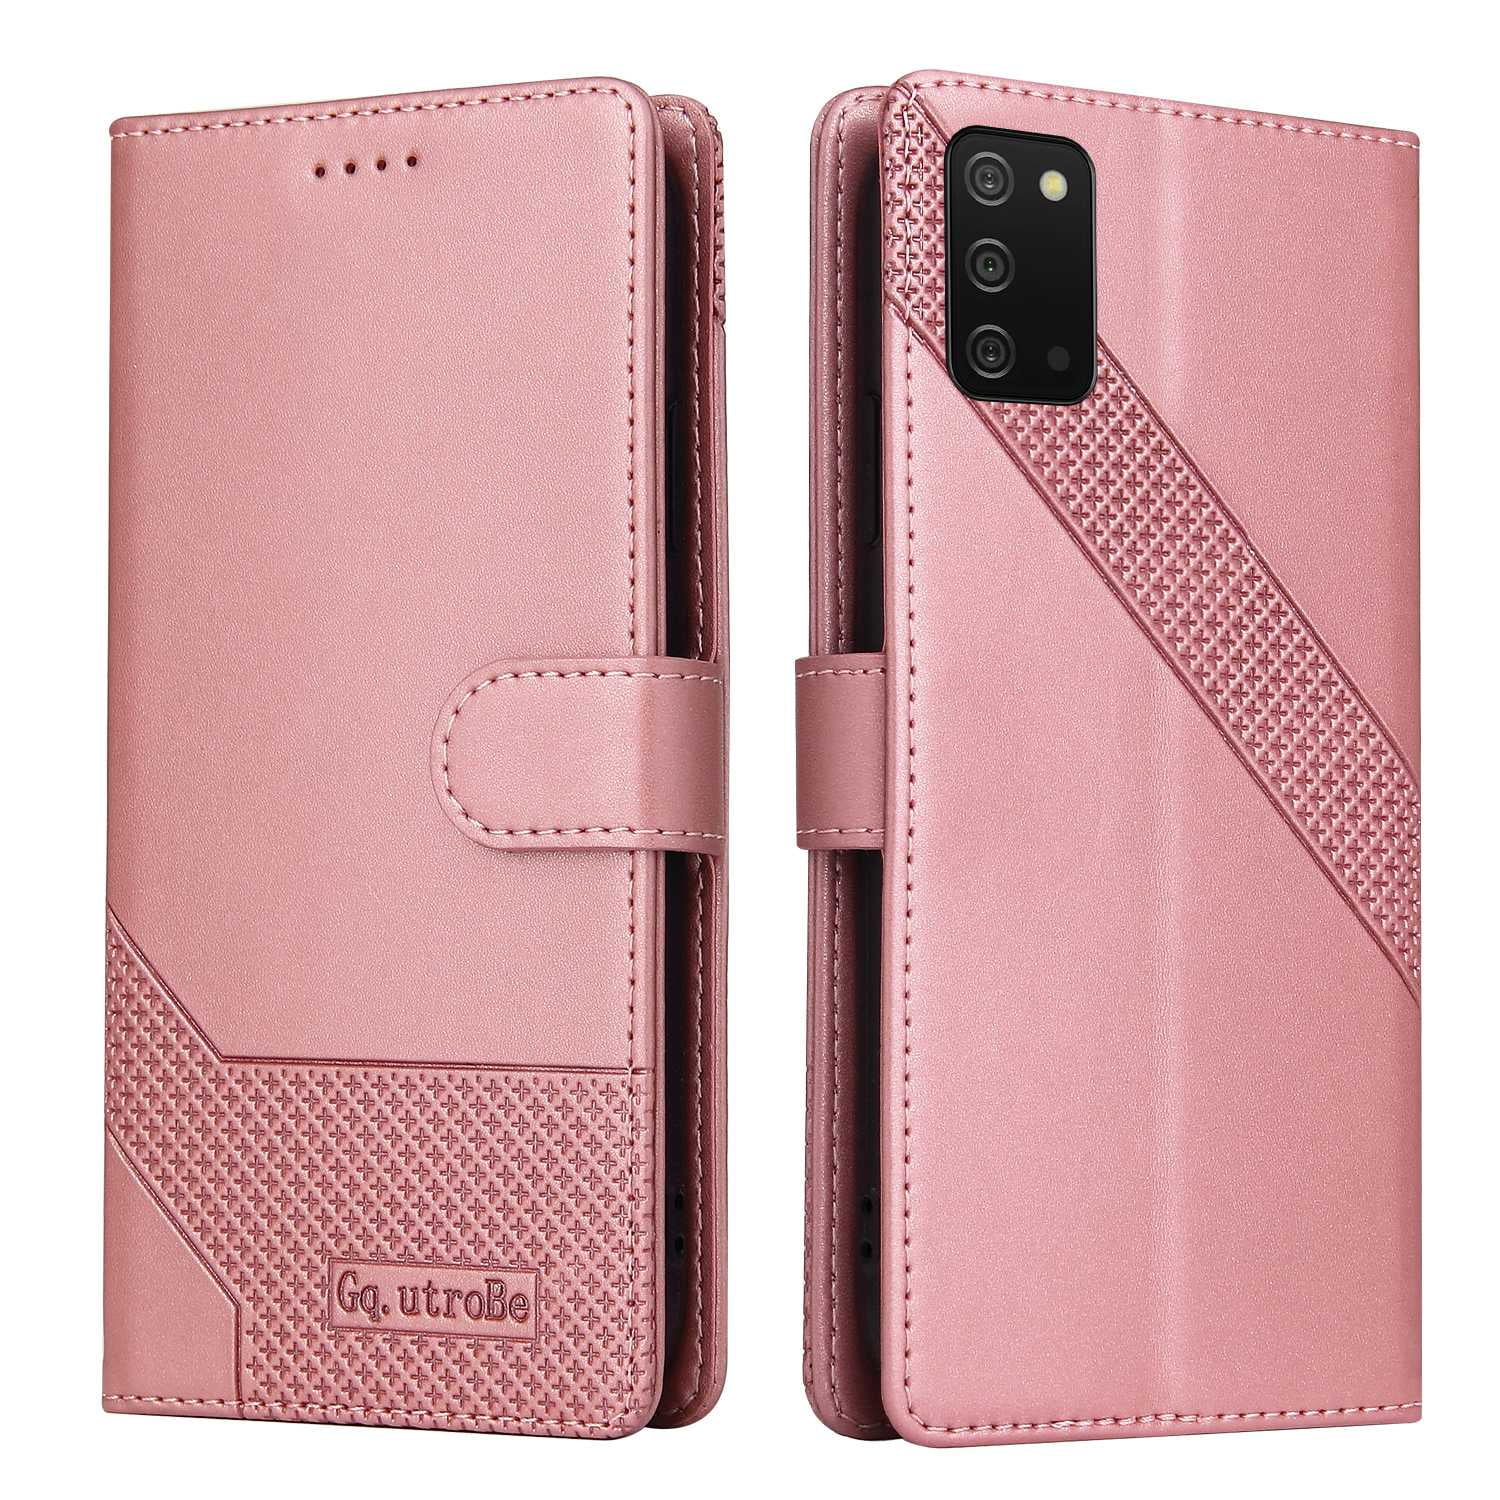 Premium Leather Galaxy A03s Flip Wallet Case with Screen Protector Shockproof Cover KRAFTCARE Samsung Galaxy A03s Case Rose Gold RFID Blocking Kickstand Card Slots Phone Case for Samsung A03s